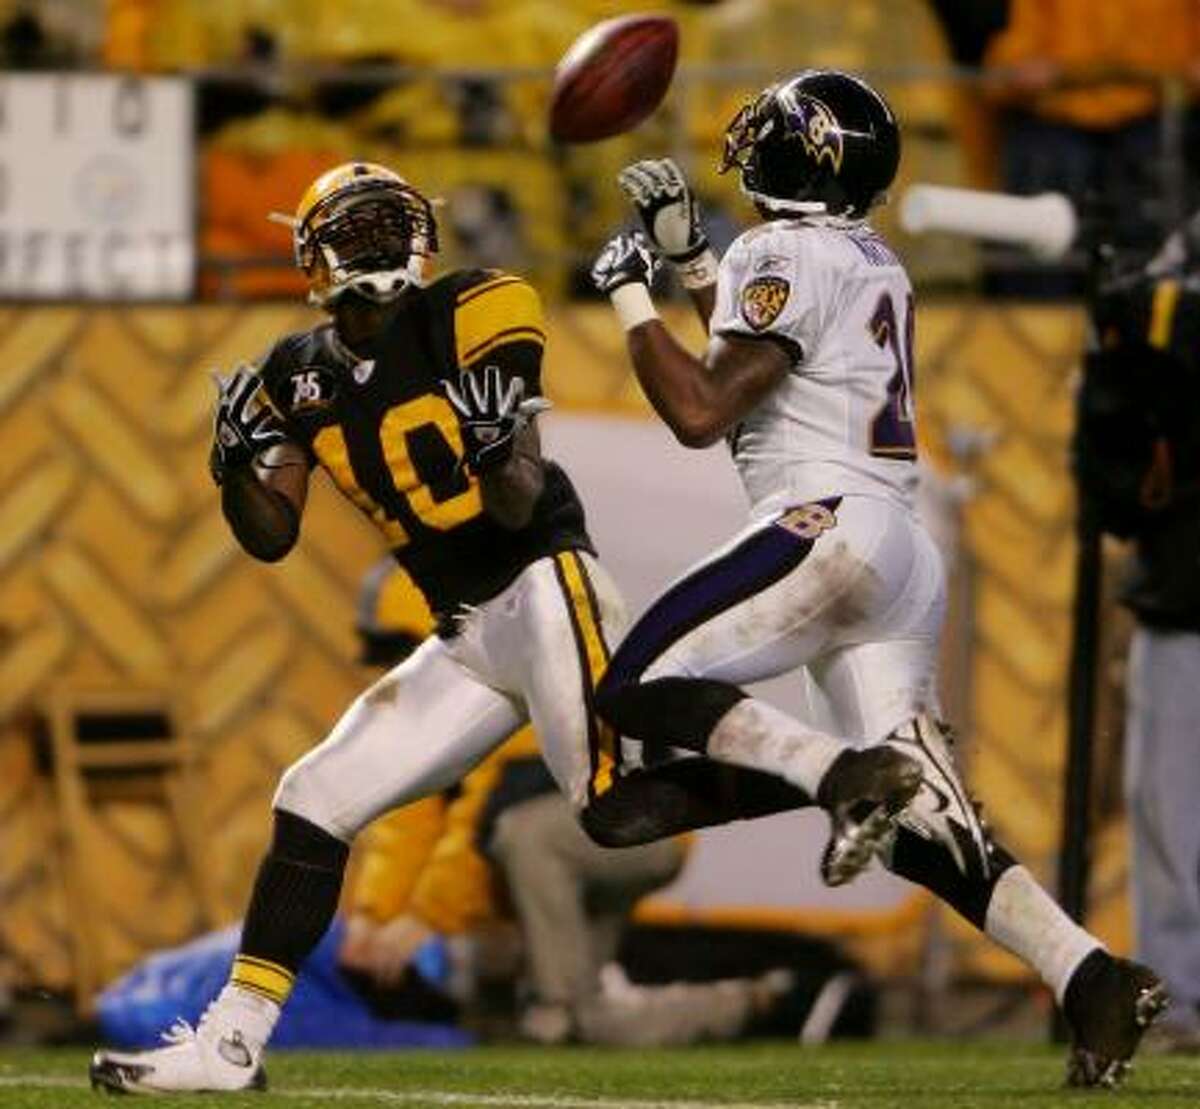 The Steelers' Santonio Holmes beats Derrick Martin to catch one of the five touchdown passes Ben Roethlisberger threw in the first half Monday night.